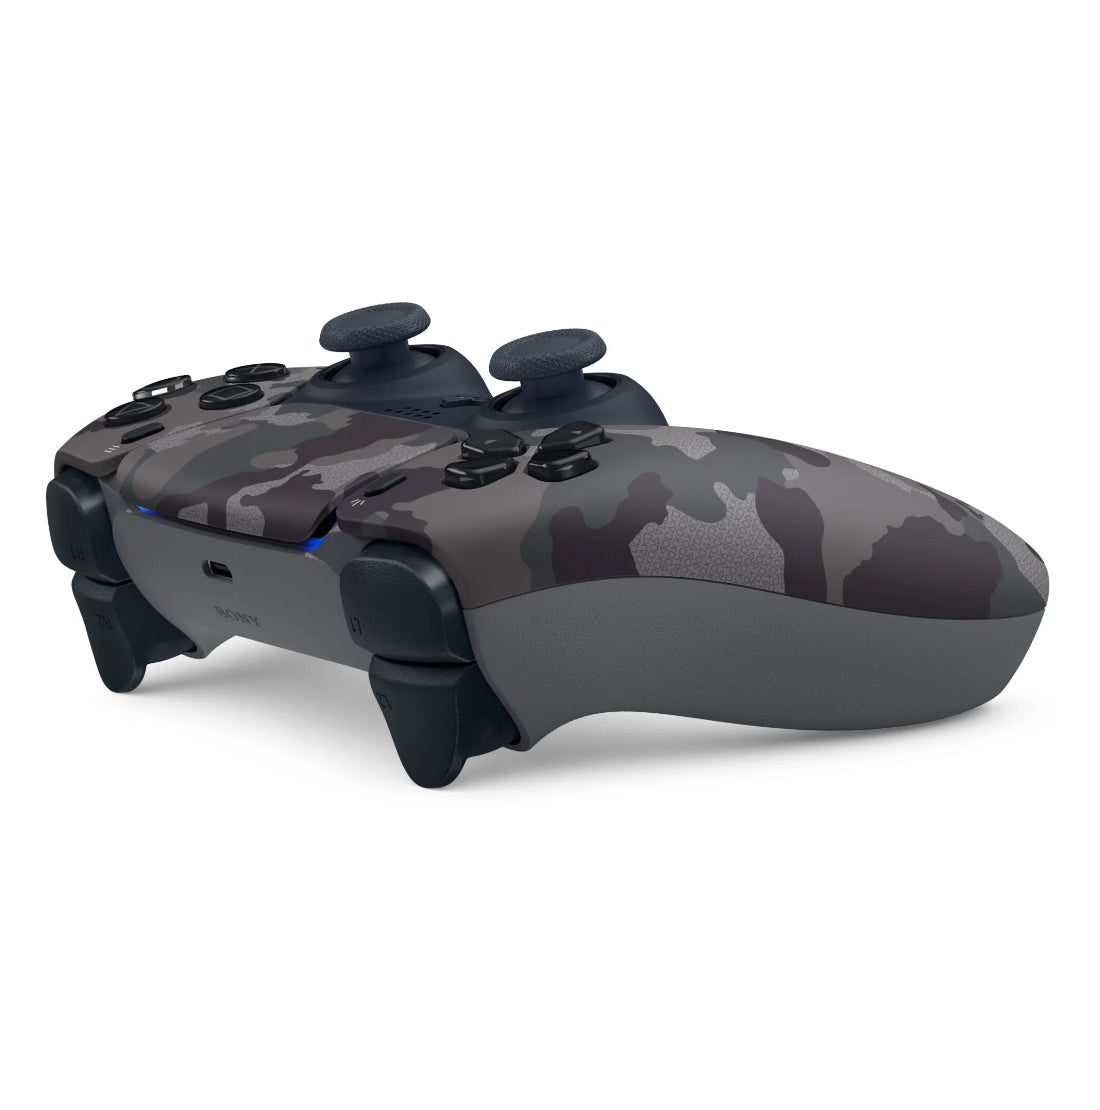 Sony Playstation 5 Digital Edition Bundle with Extra Gray Camo Controller, Charging Station and Cleaning Cloth - Pro-Distributing